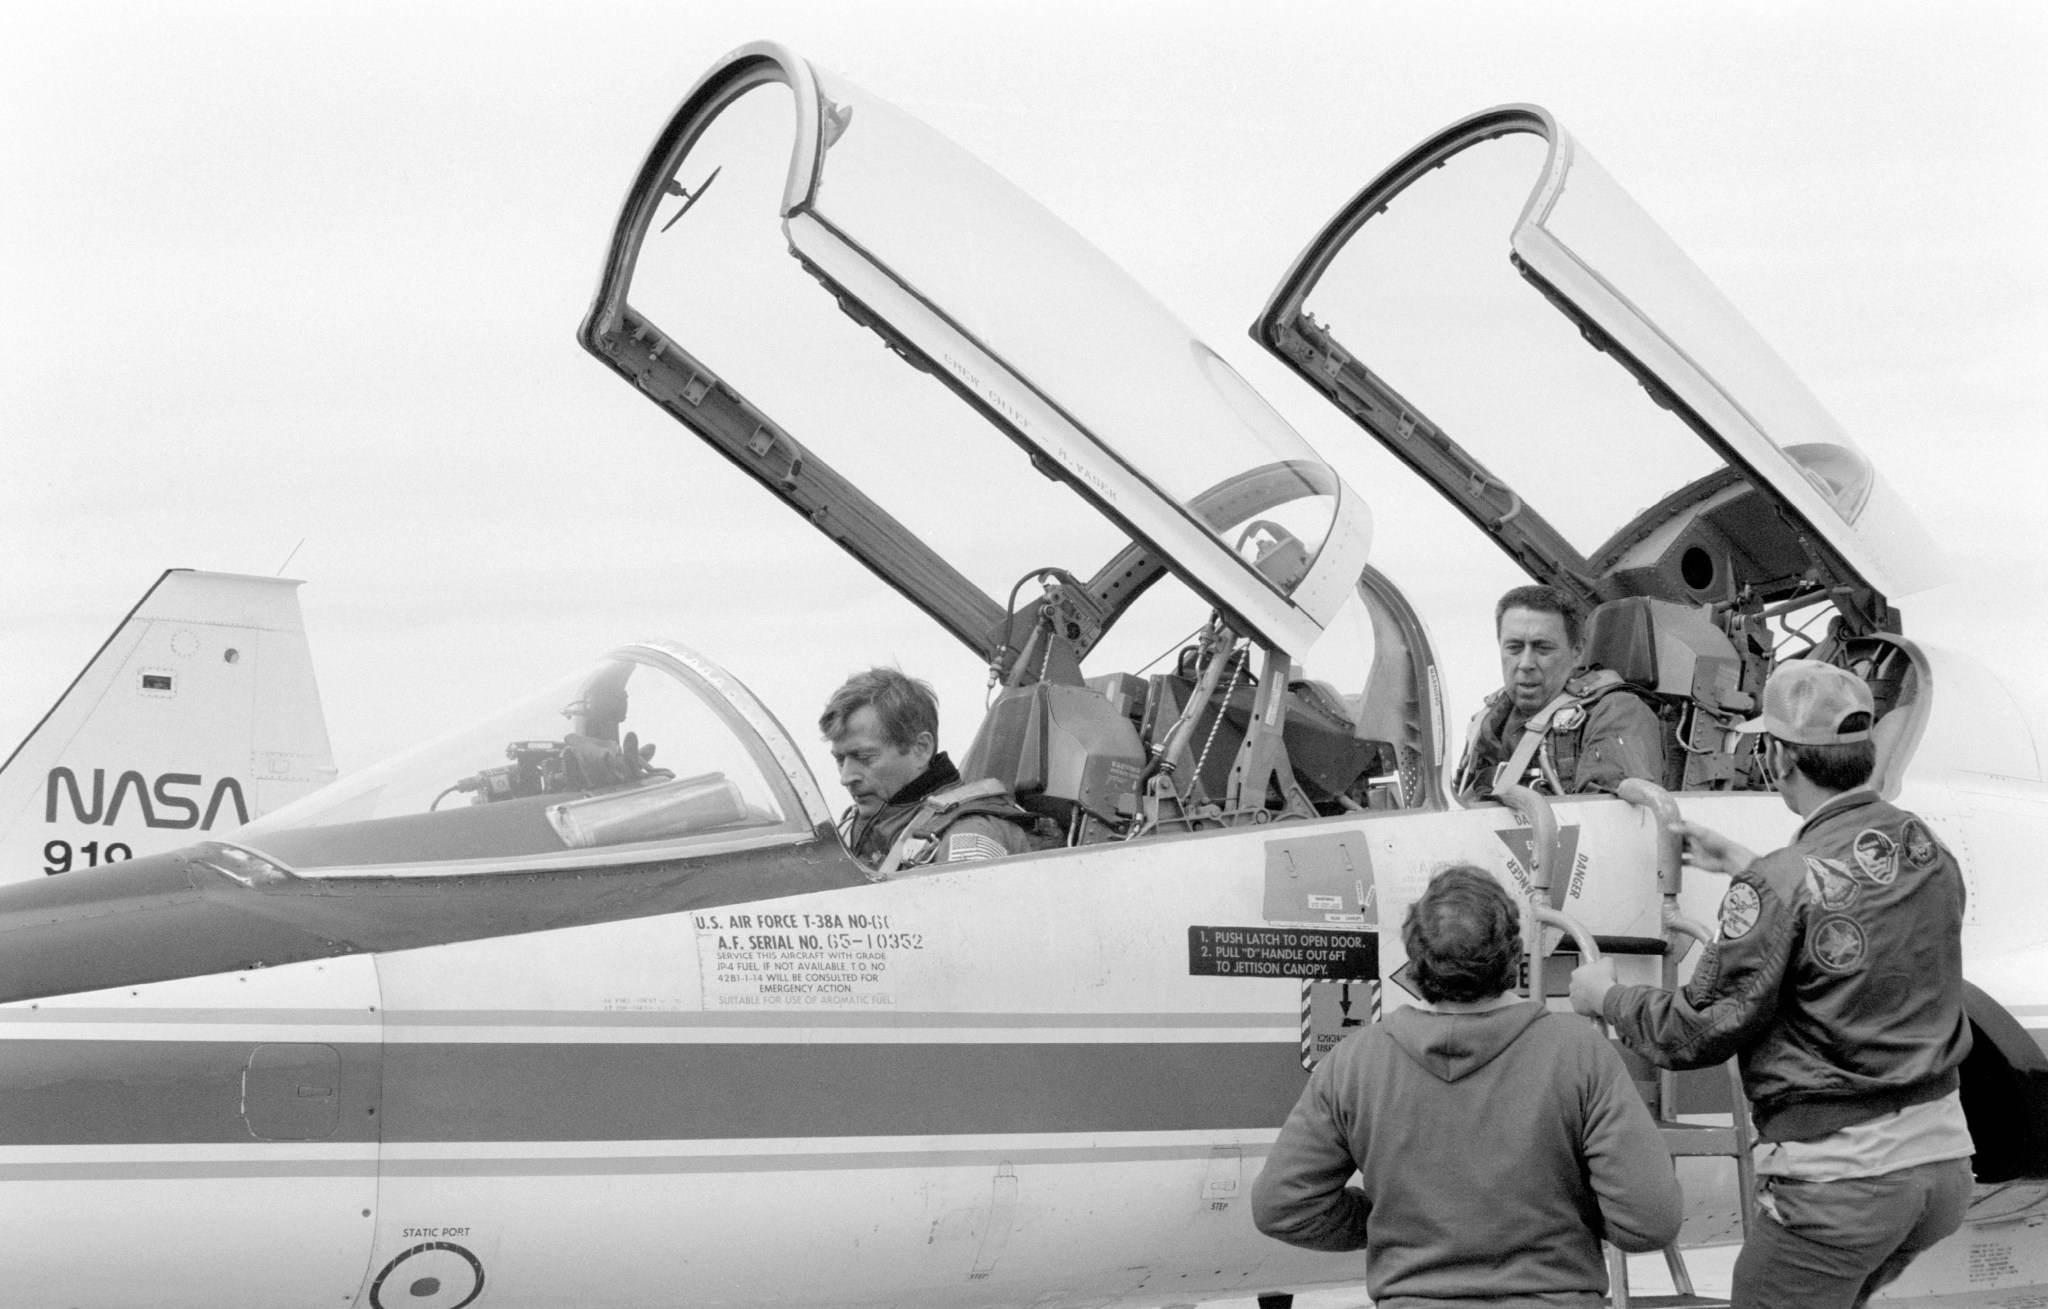 George Abbey, Director of Flight Crew Operations, and John W. Young, Chief of the Astronaut Office, leaving Ellington AFB in a T-38 aircraft